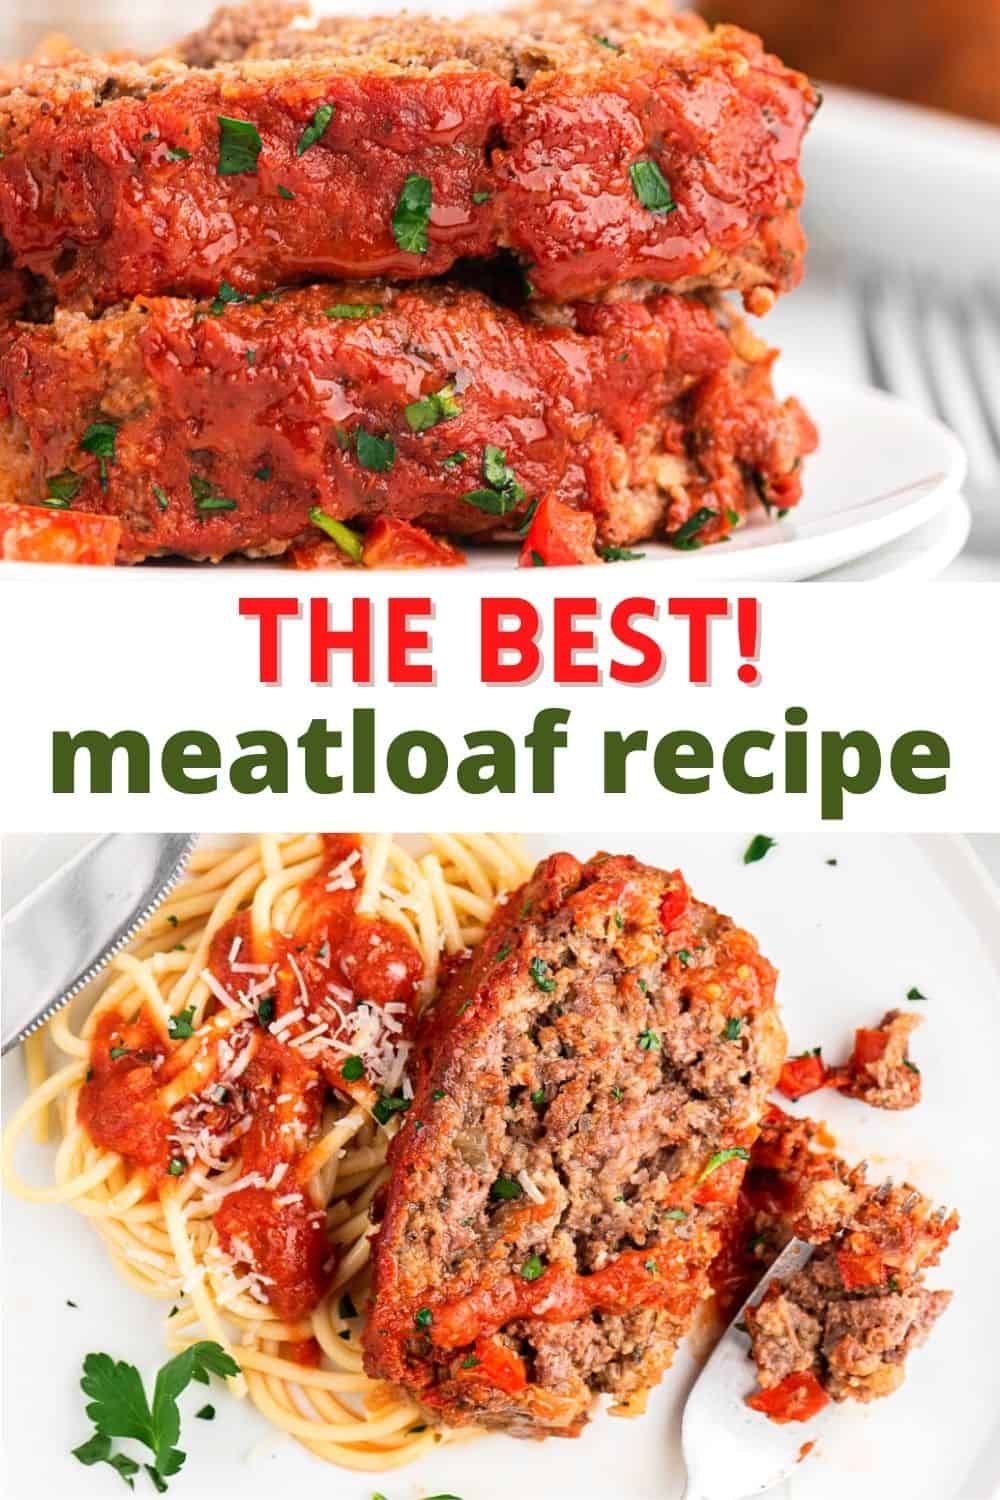 This tender meatloaf is better than a classic meatloaf recipe. Instead of barbecue glaze or ketchup based meatloaf sauce, this recipe calls for Italian seasonings and marinara. We think it's the best homemade meatloaf recipe!